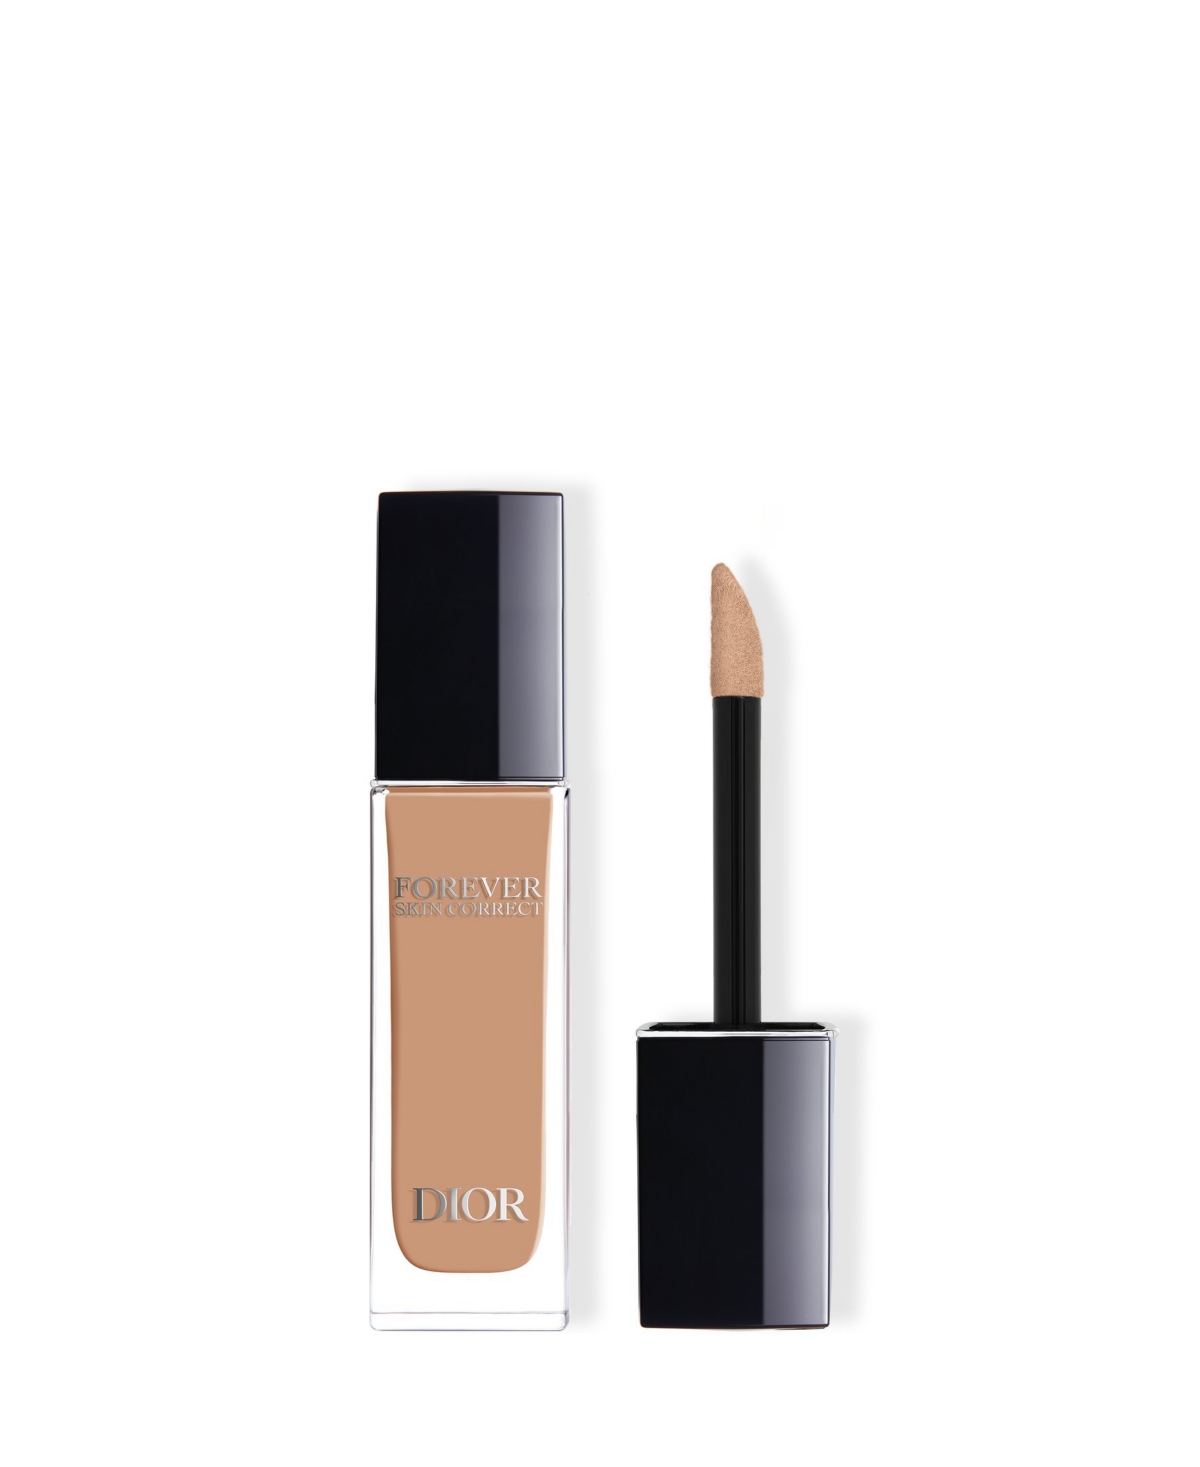 Dior Forever Skin Correct Full-coverage Concealer In N Neutral (medium Skin With Neutral Be